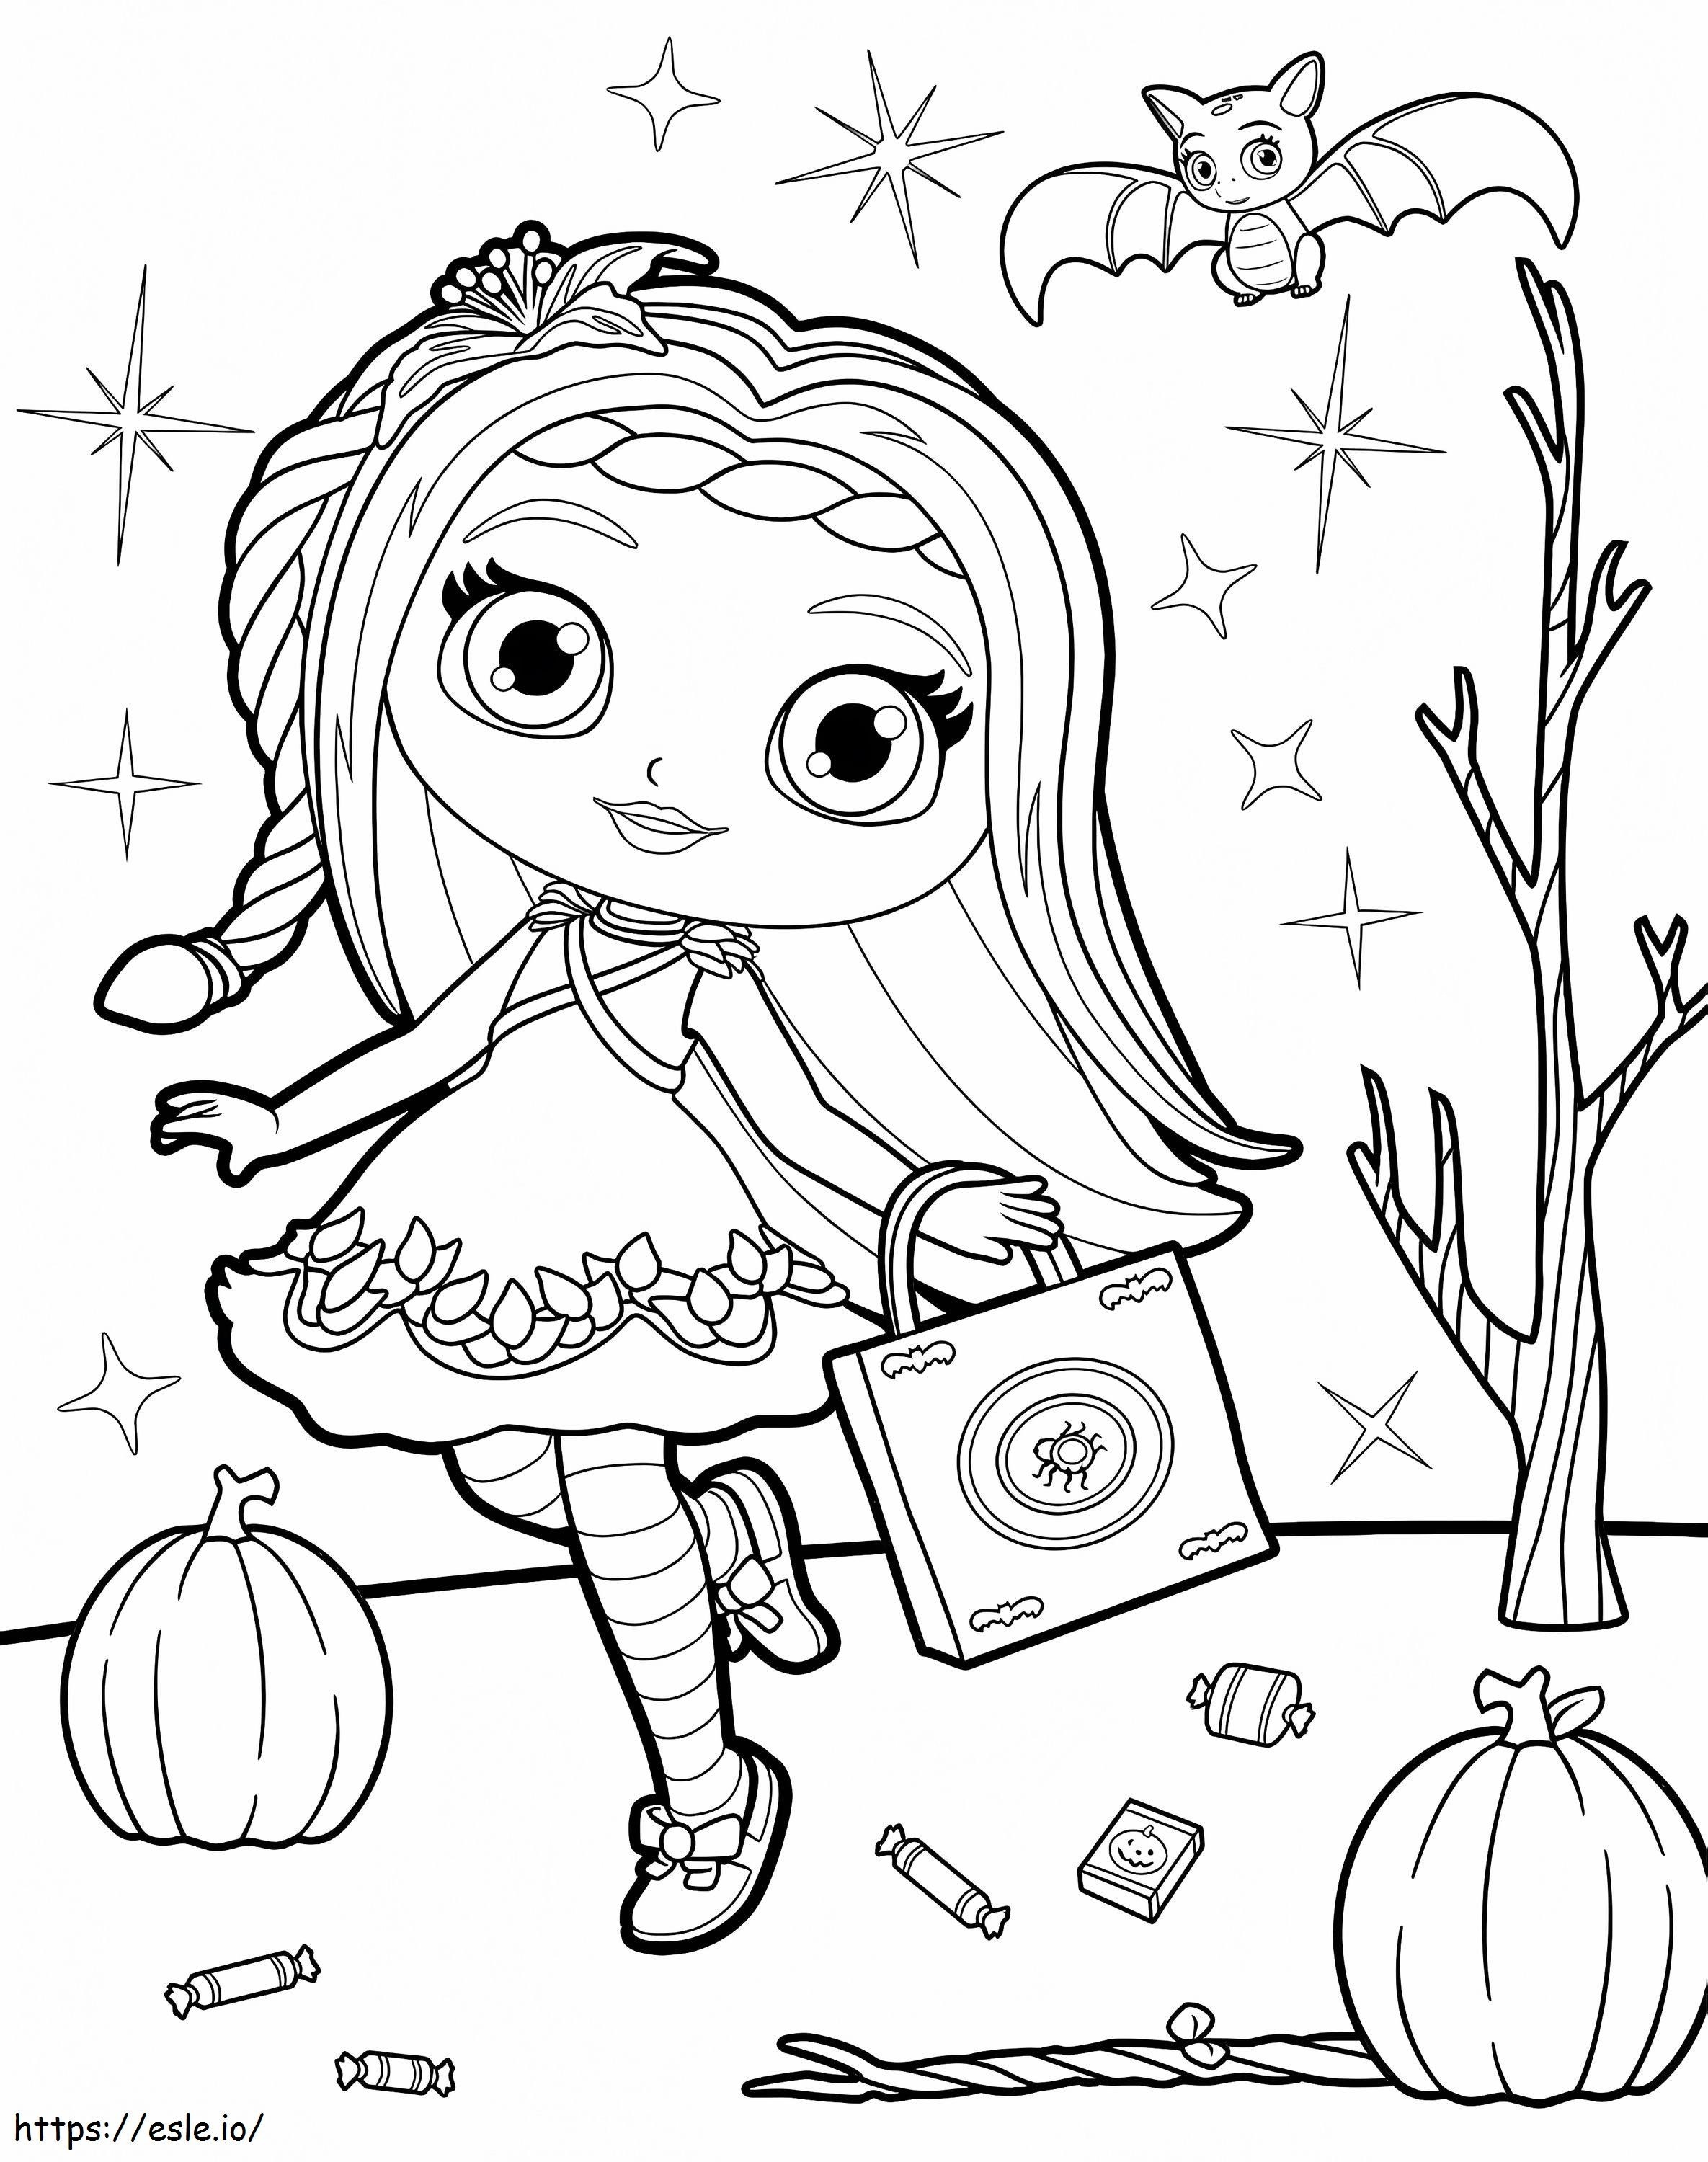 Halloween posie little charmers coloring page